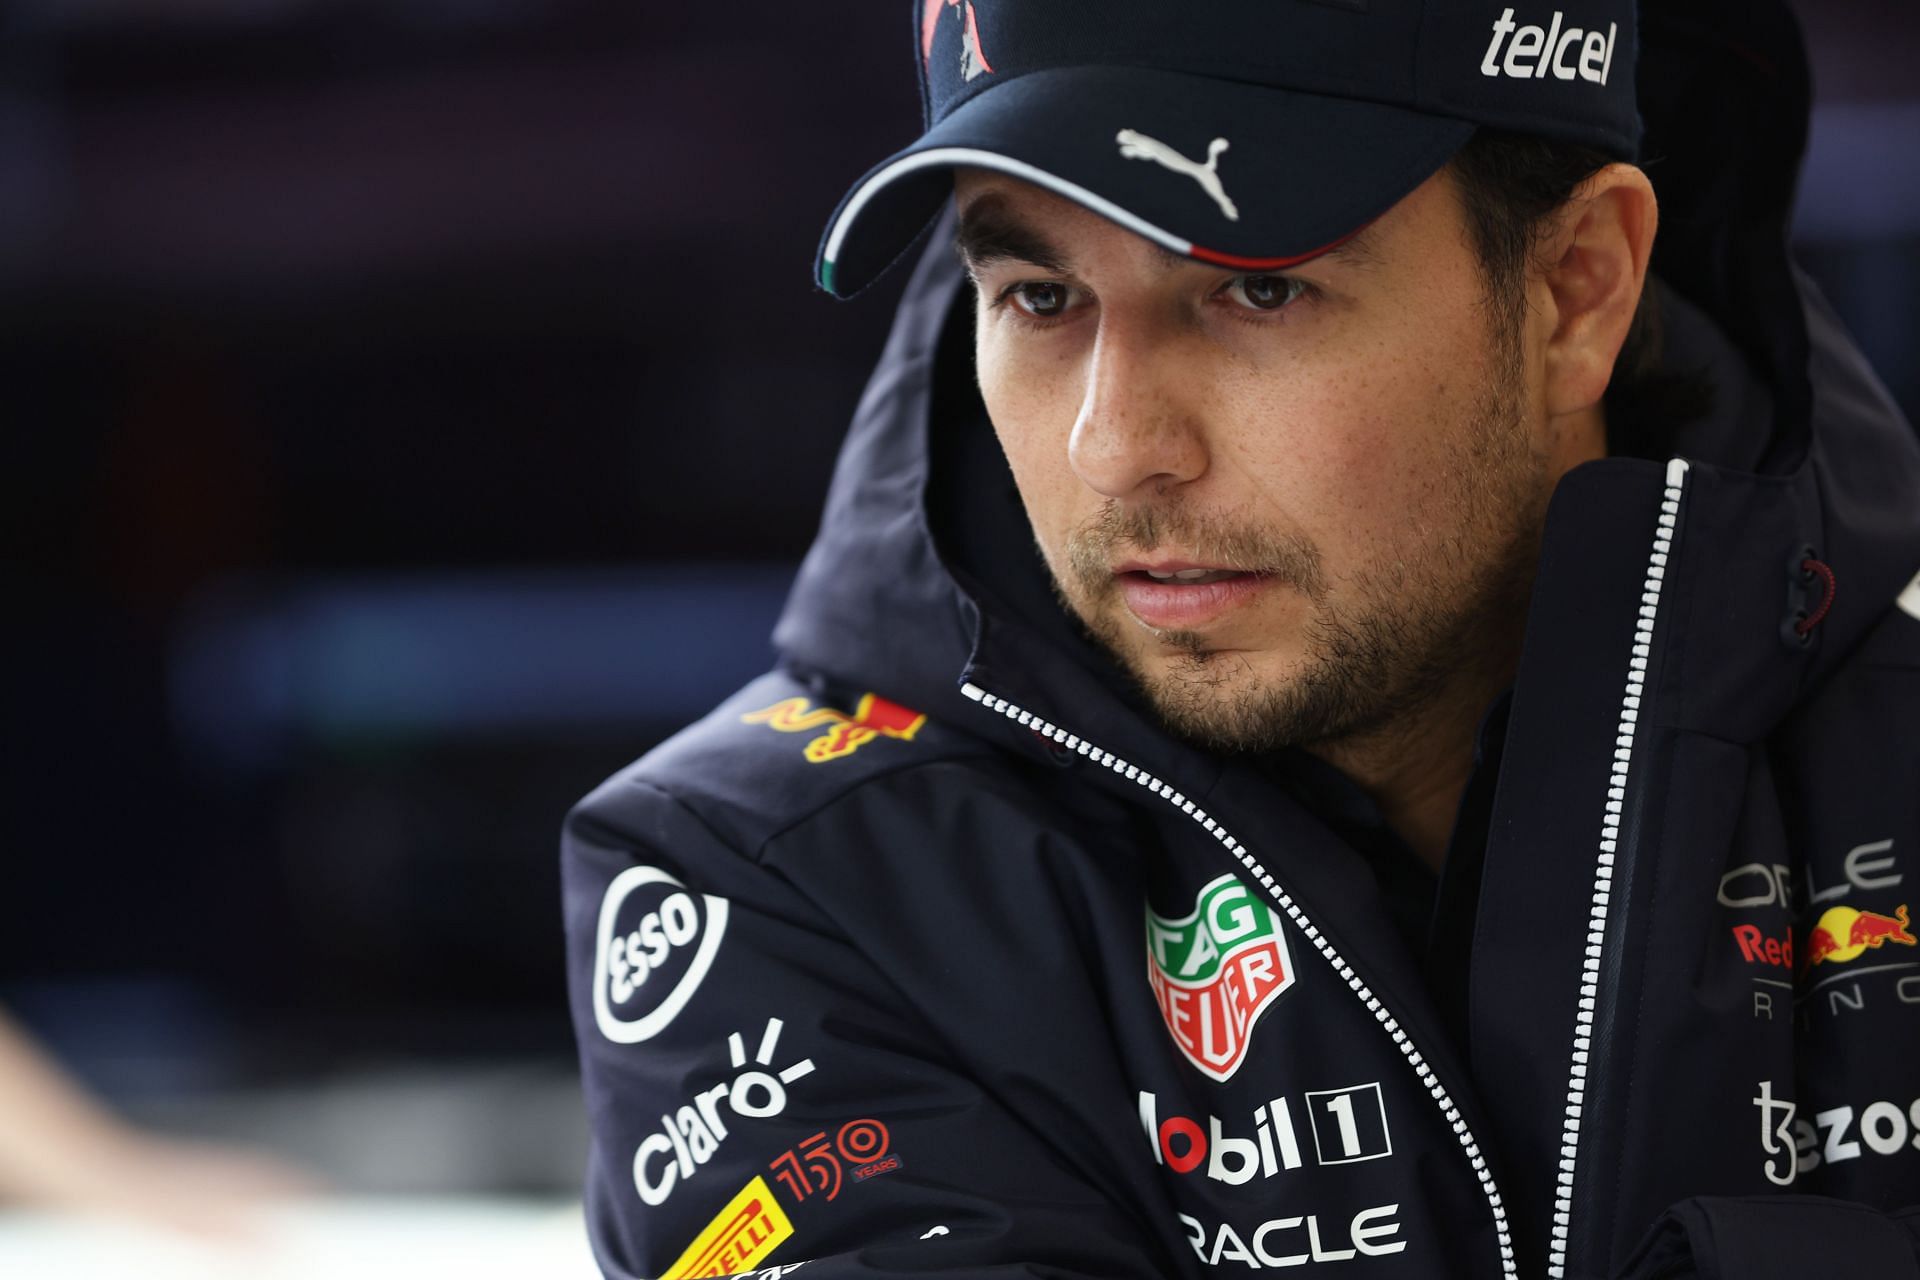 Sergio Perez of Red Bull Racing looks on in the garage during Day 1 of the 2022 F1 pre-season test in Barcelona, Spain (Photo by Mark Thompson/Getty Images)